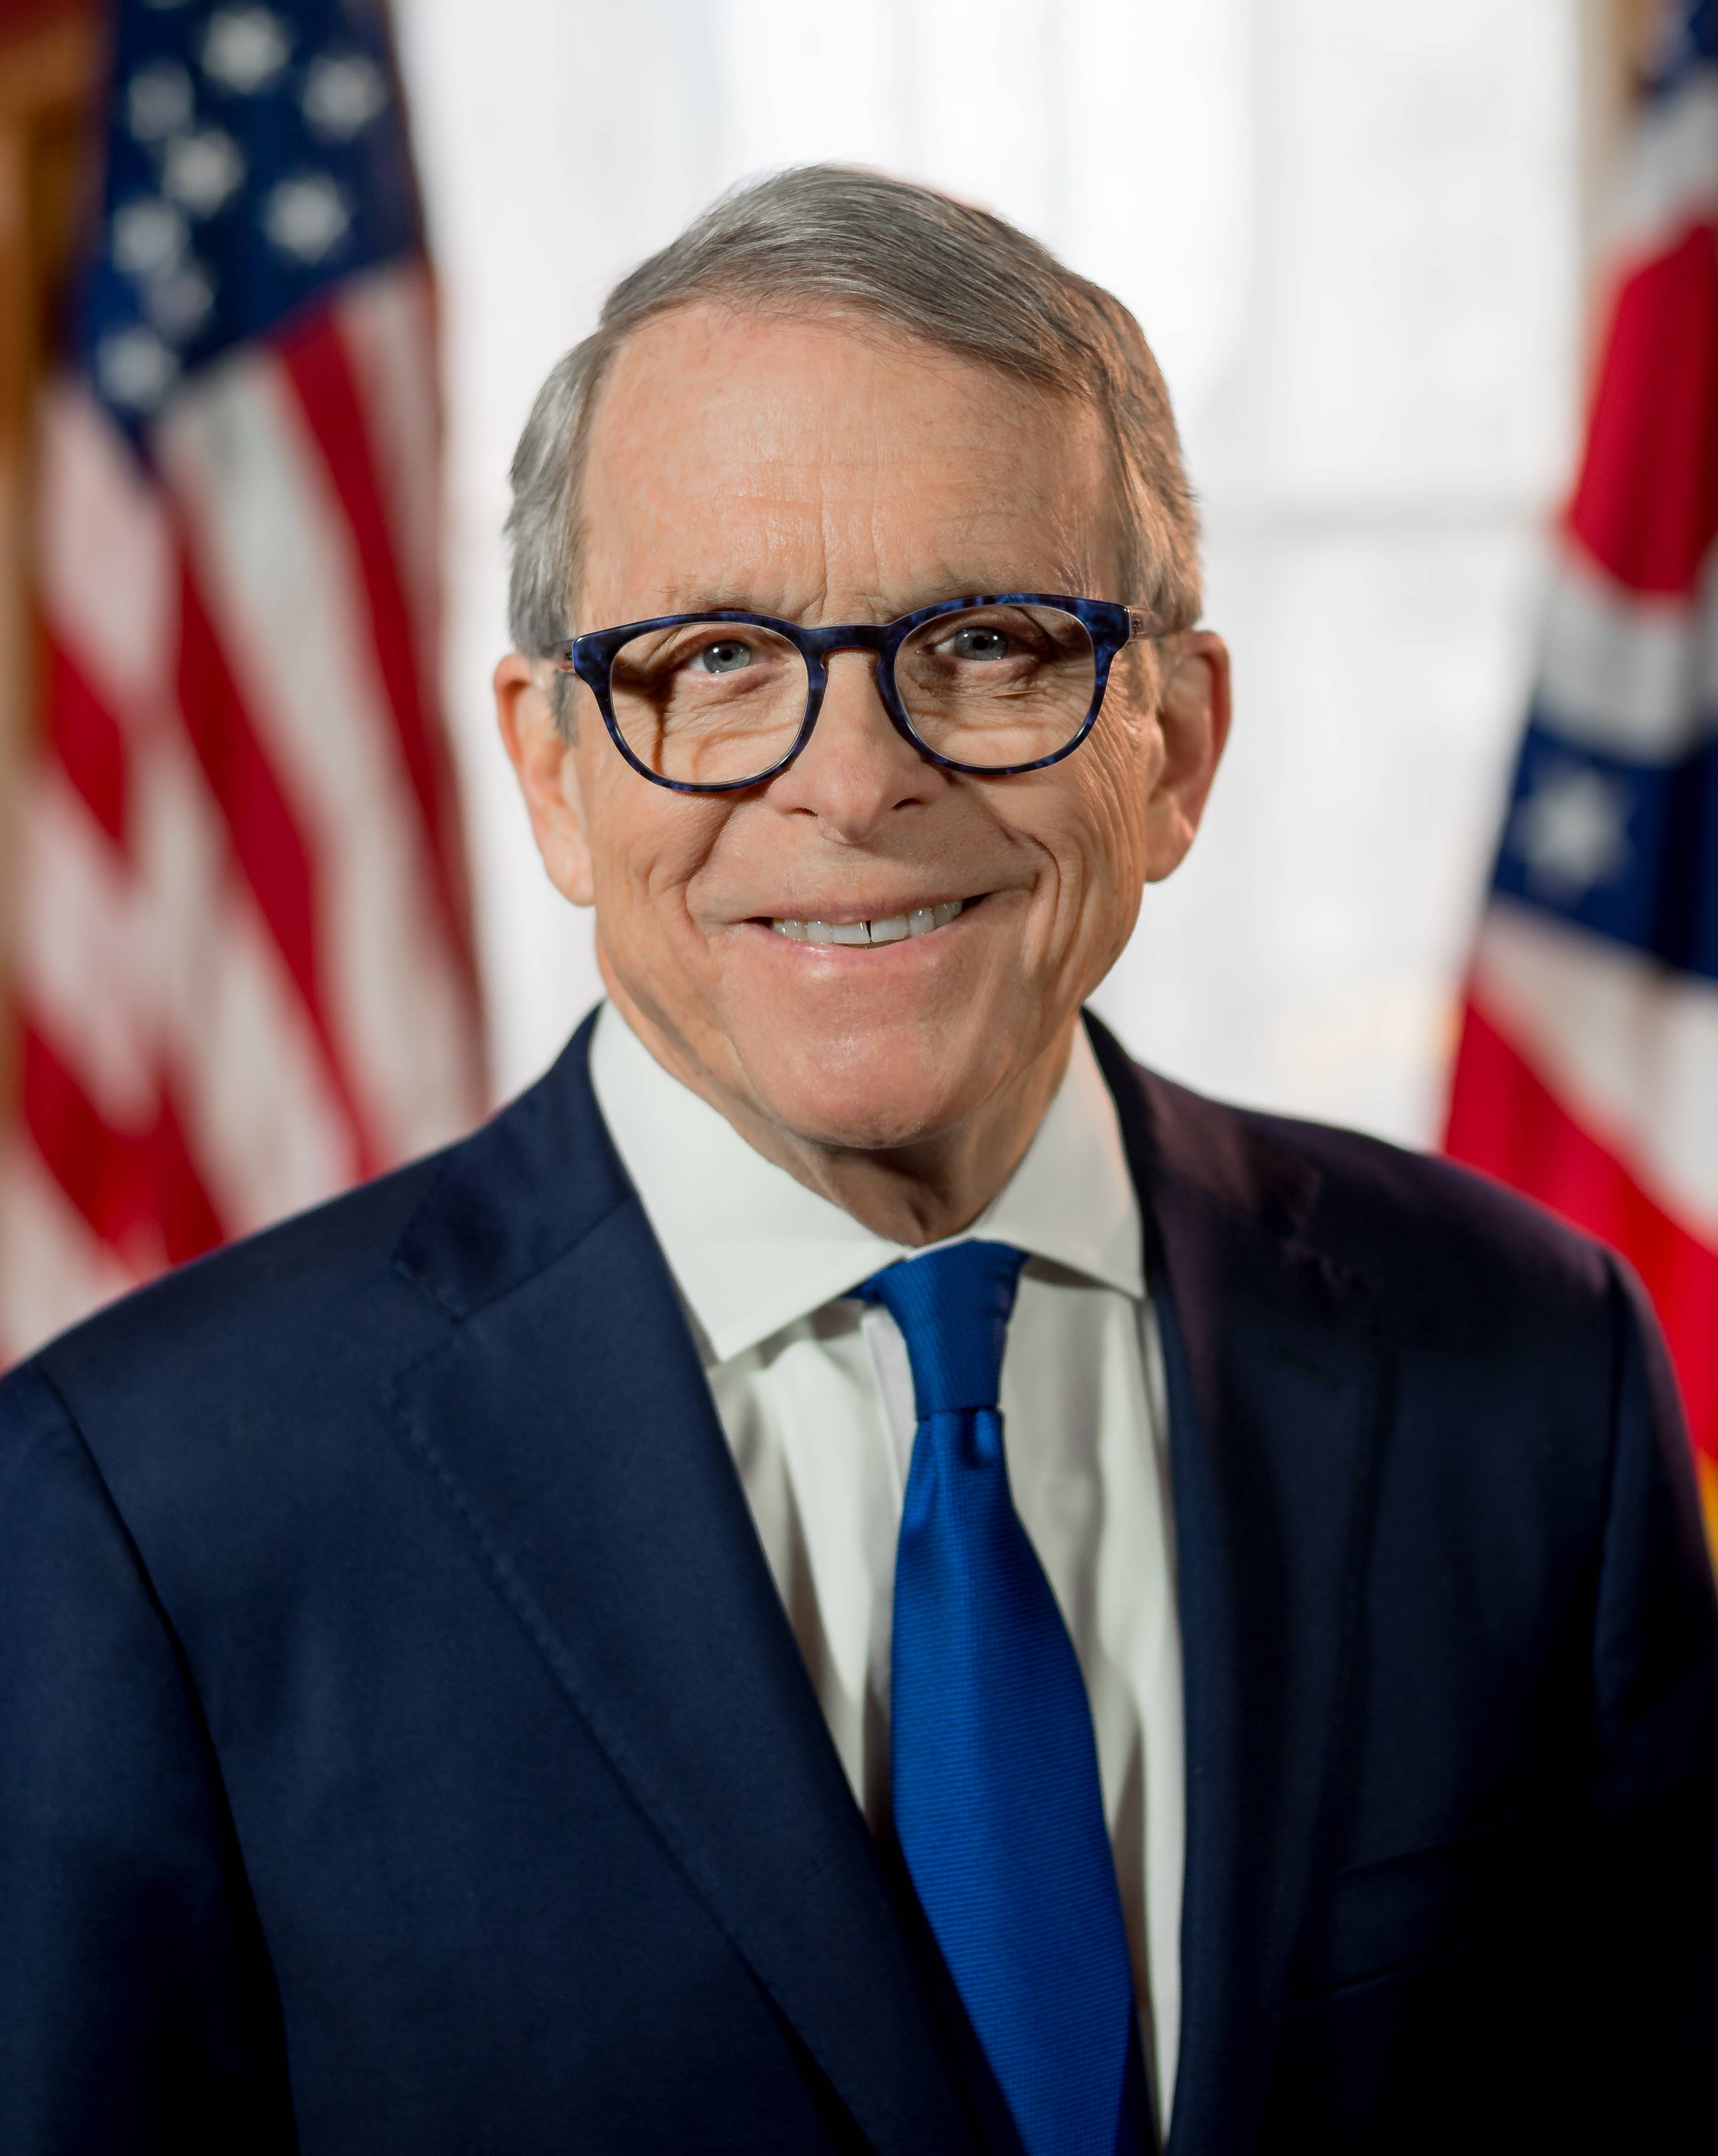 Image of Mike DeWine, Governor of Ohio, Republican Party